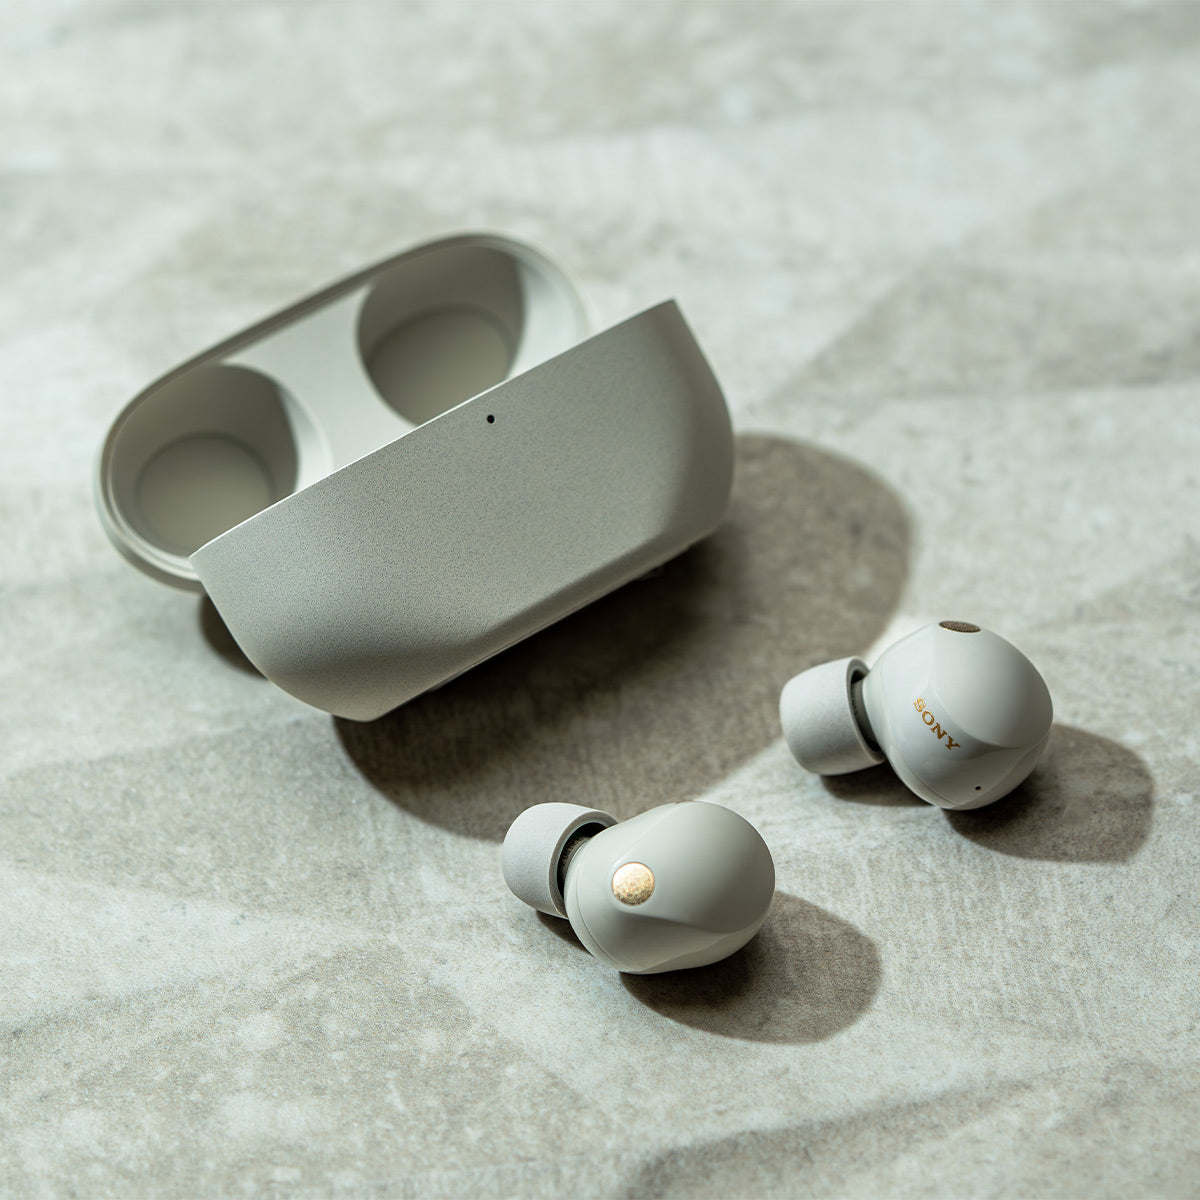 Sony WF-1000XM5 noise-cancelling earbud review